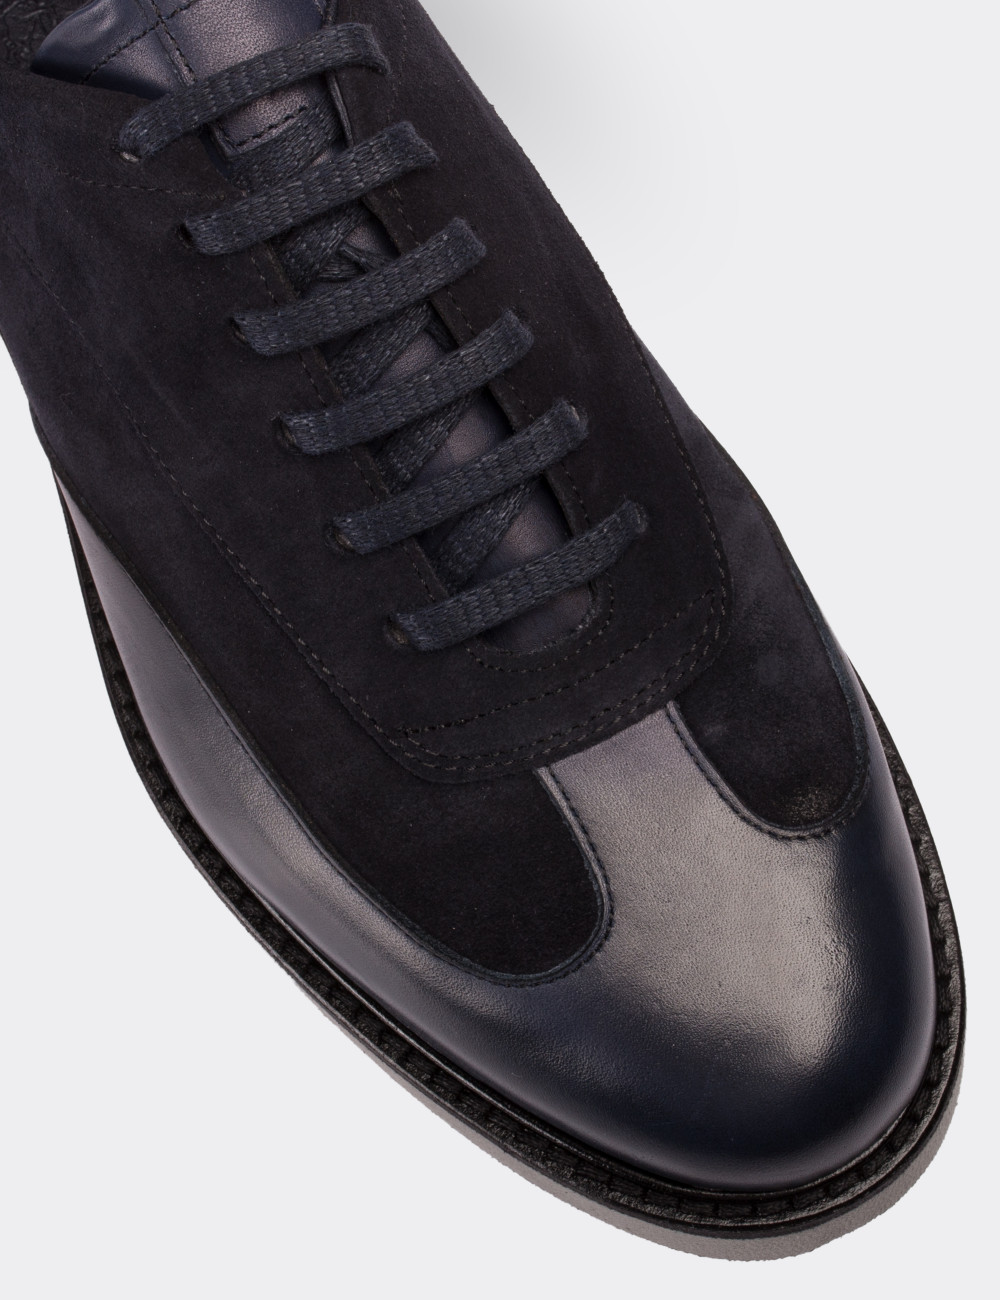 Navy Suede Leather Lace-up Shoes - 01686MLCVE01